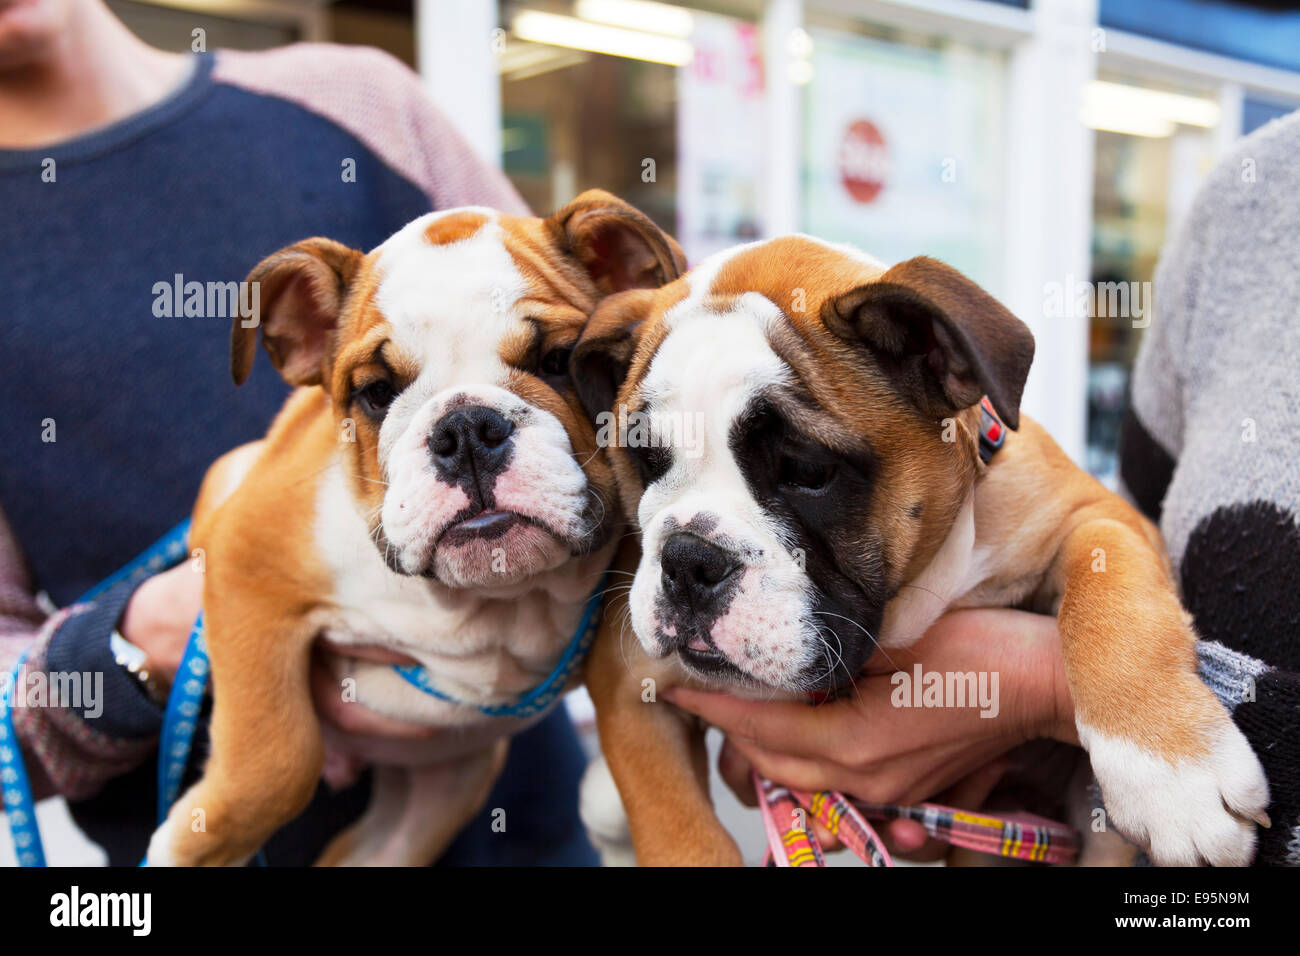 English Bulldog Puppies Bulldogs Dogs Two Pups Cute Together